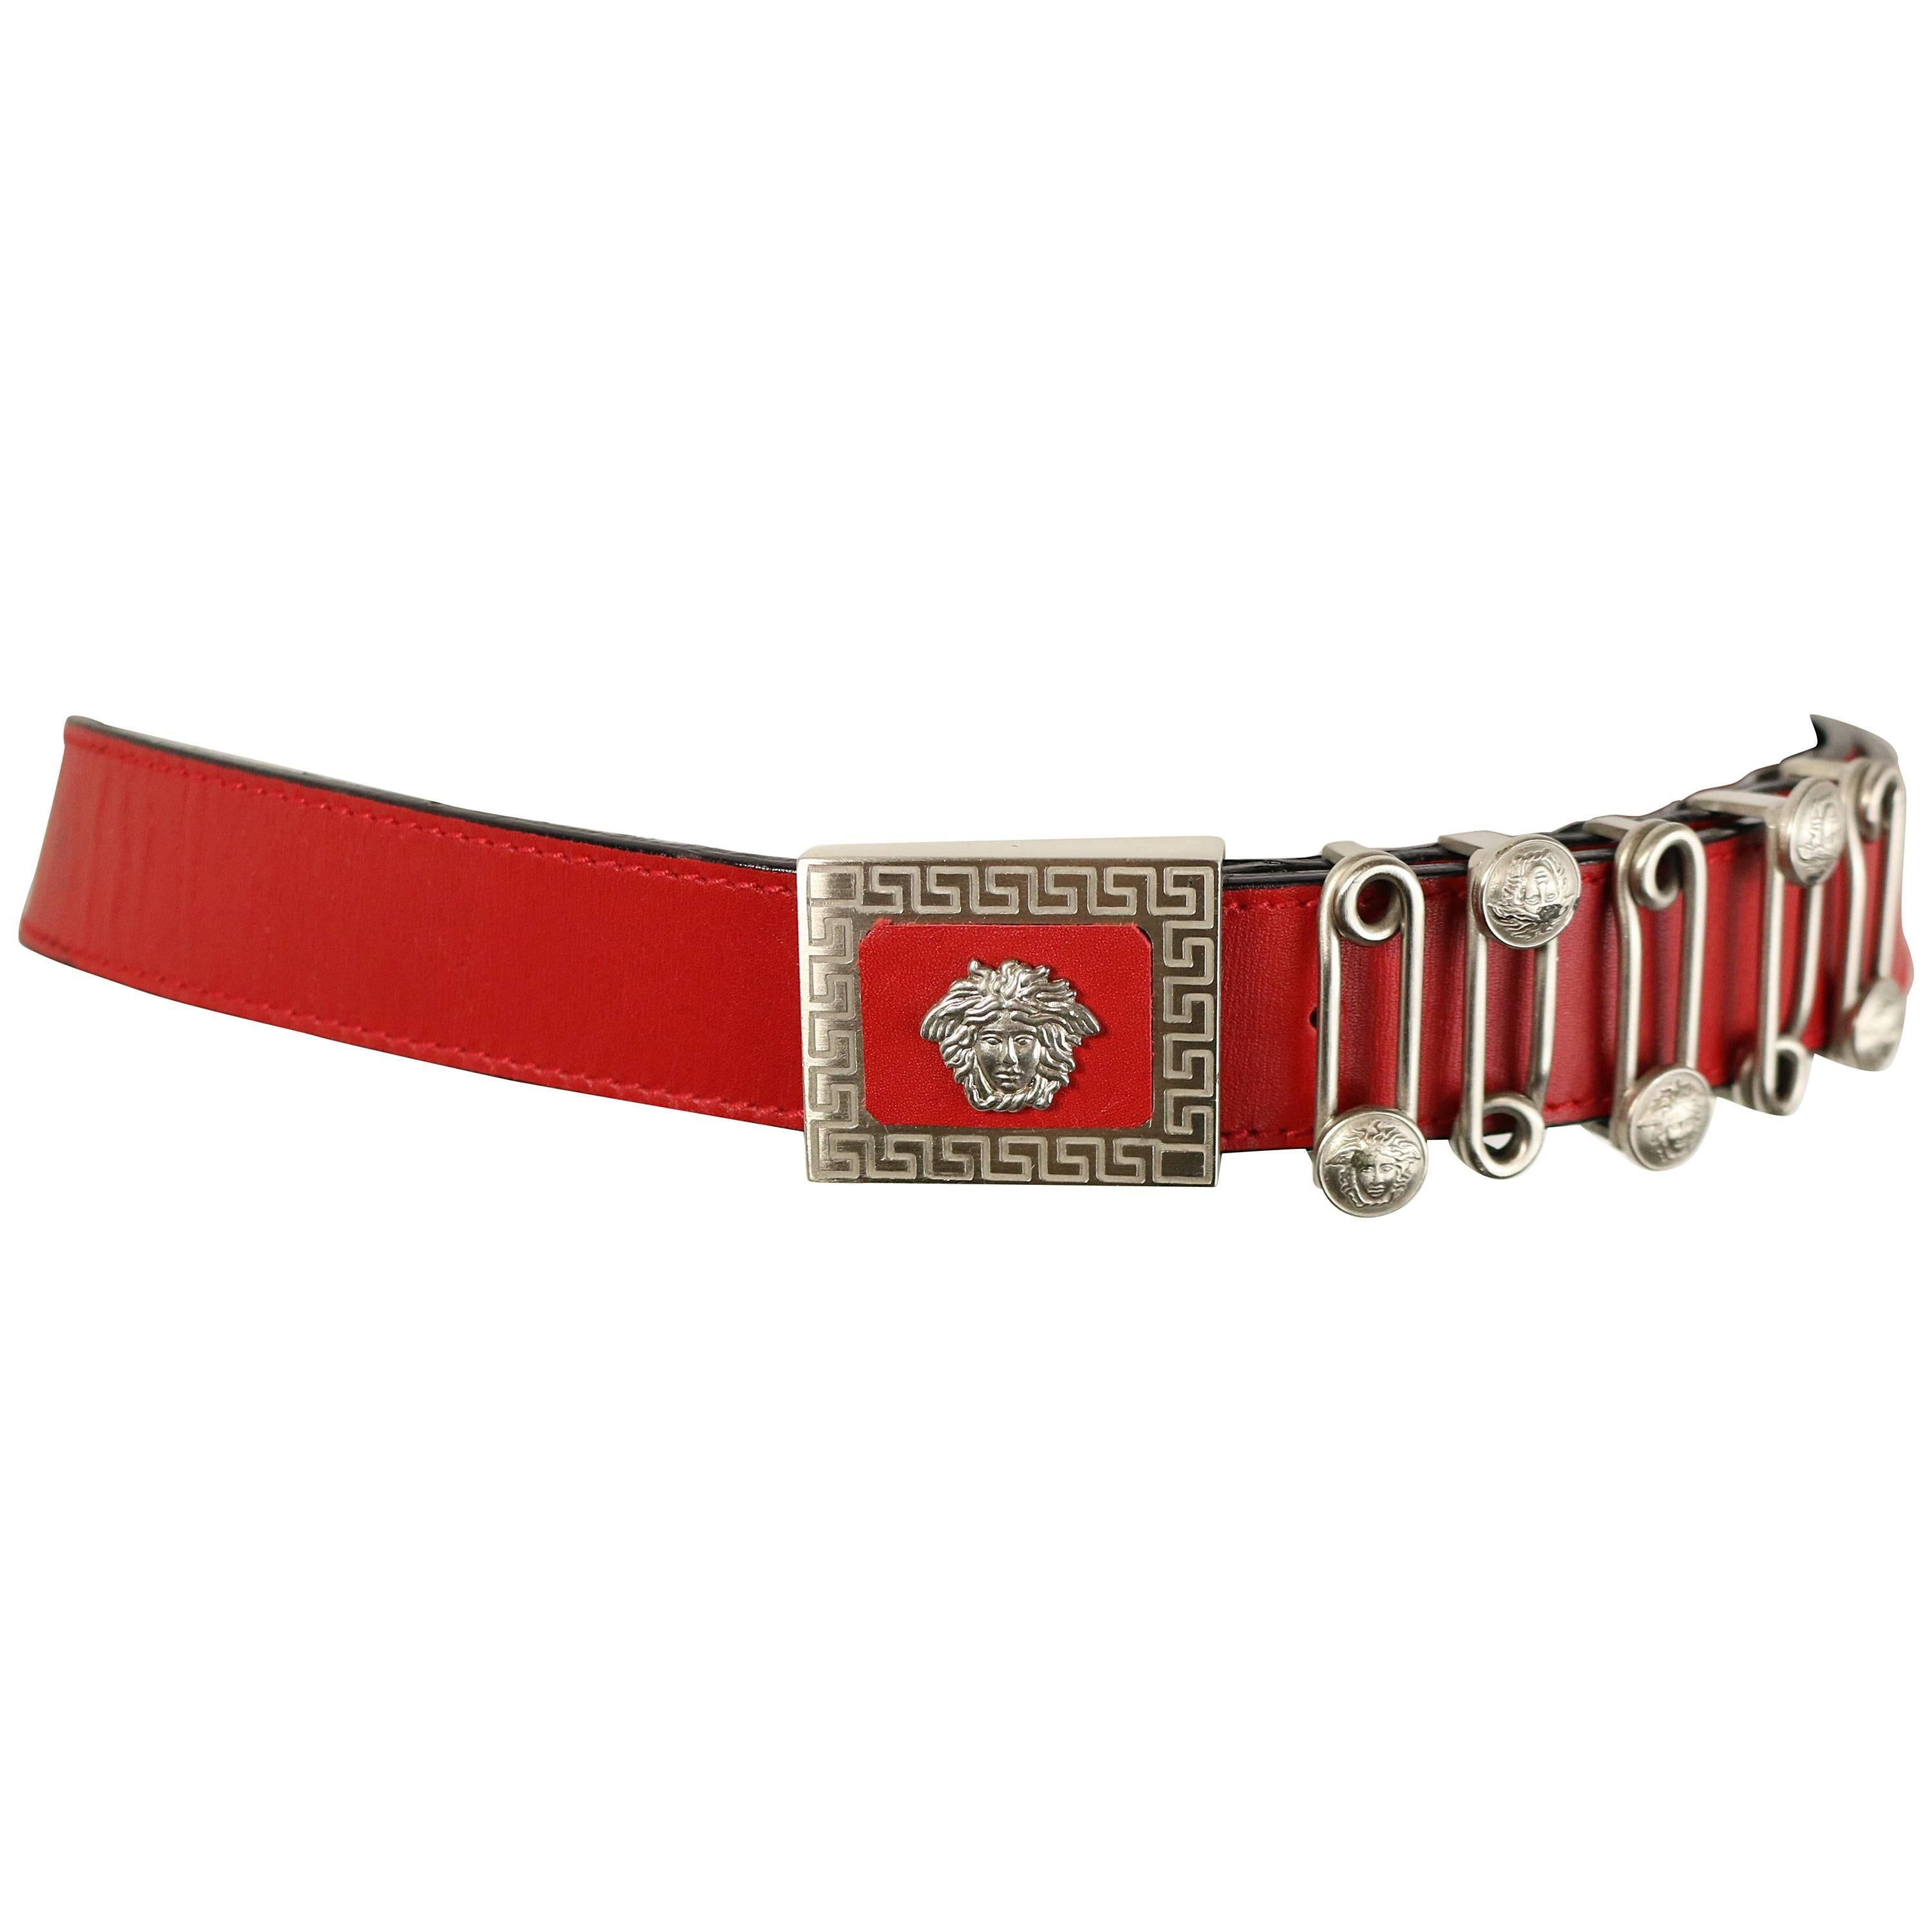 Vintage 90s Gianni Versace Red Leather Silver Medusa Pin Belt